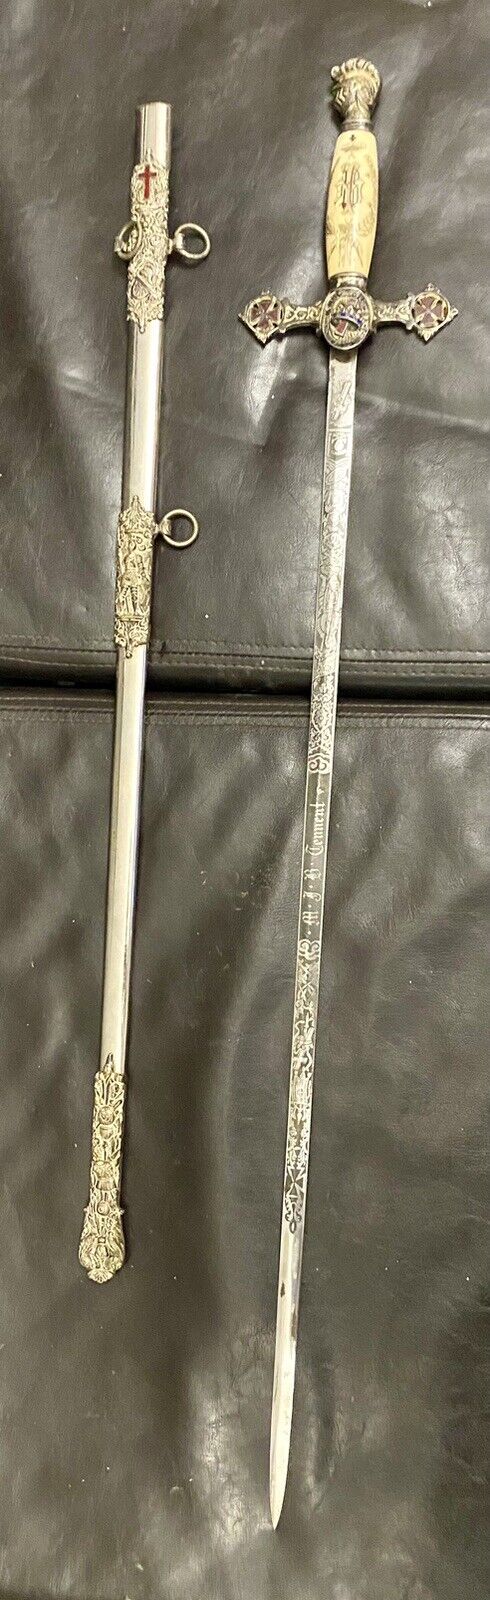 Antique Henderson Ames Knights Templar Masonic Sword and Scabbard W/ Engravings